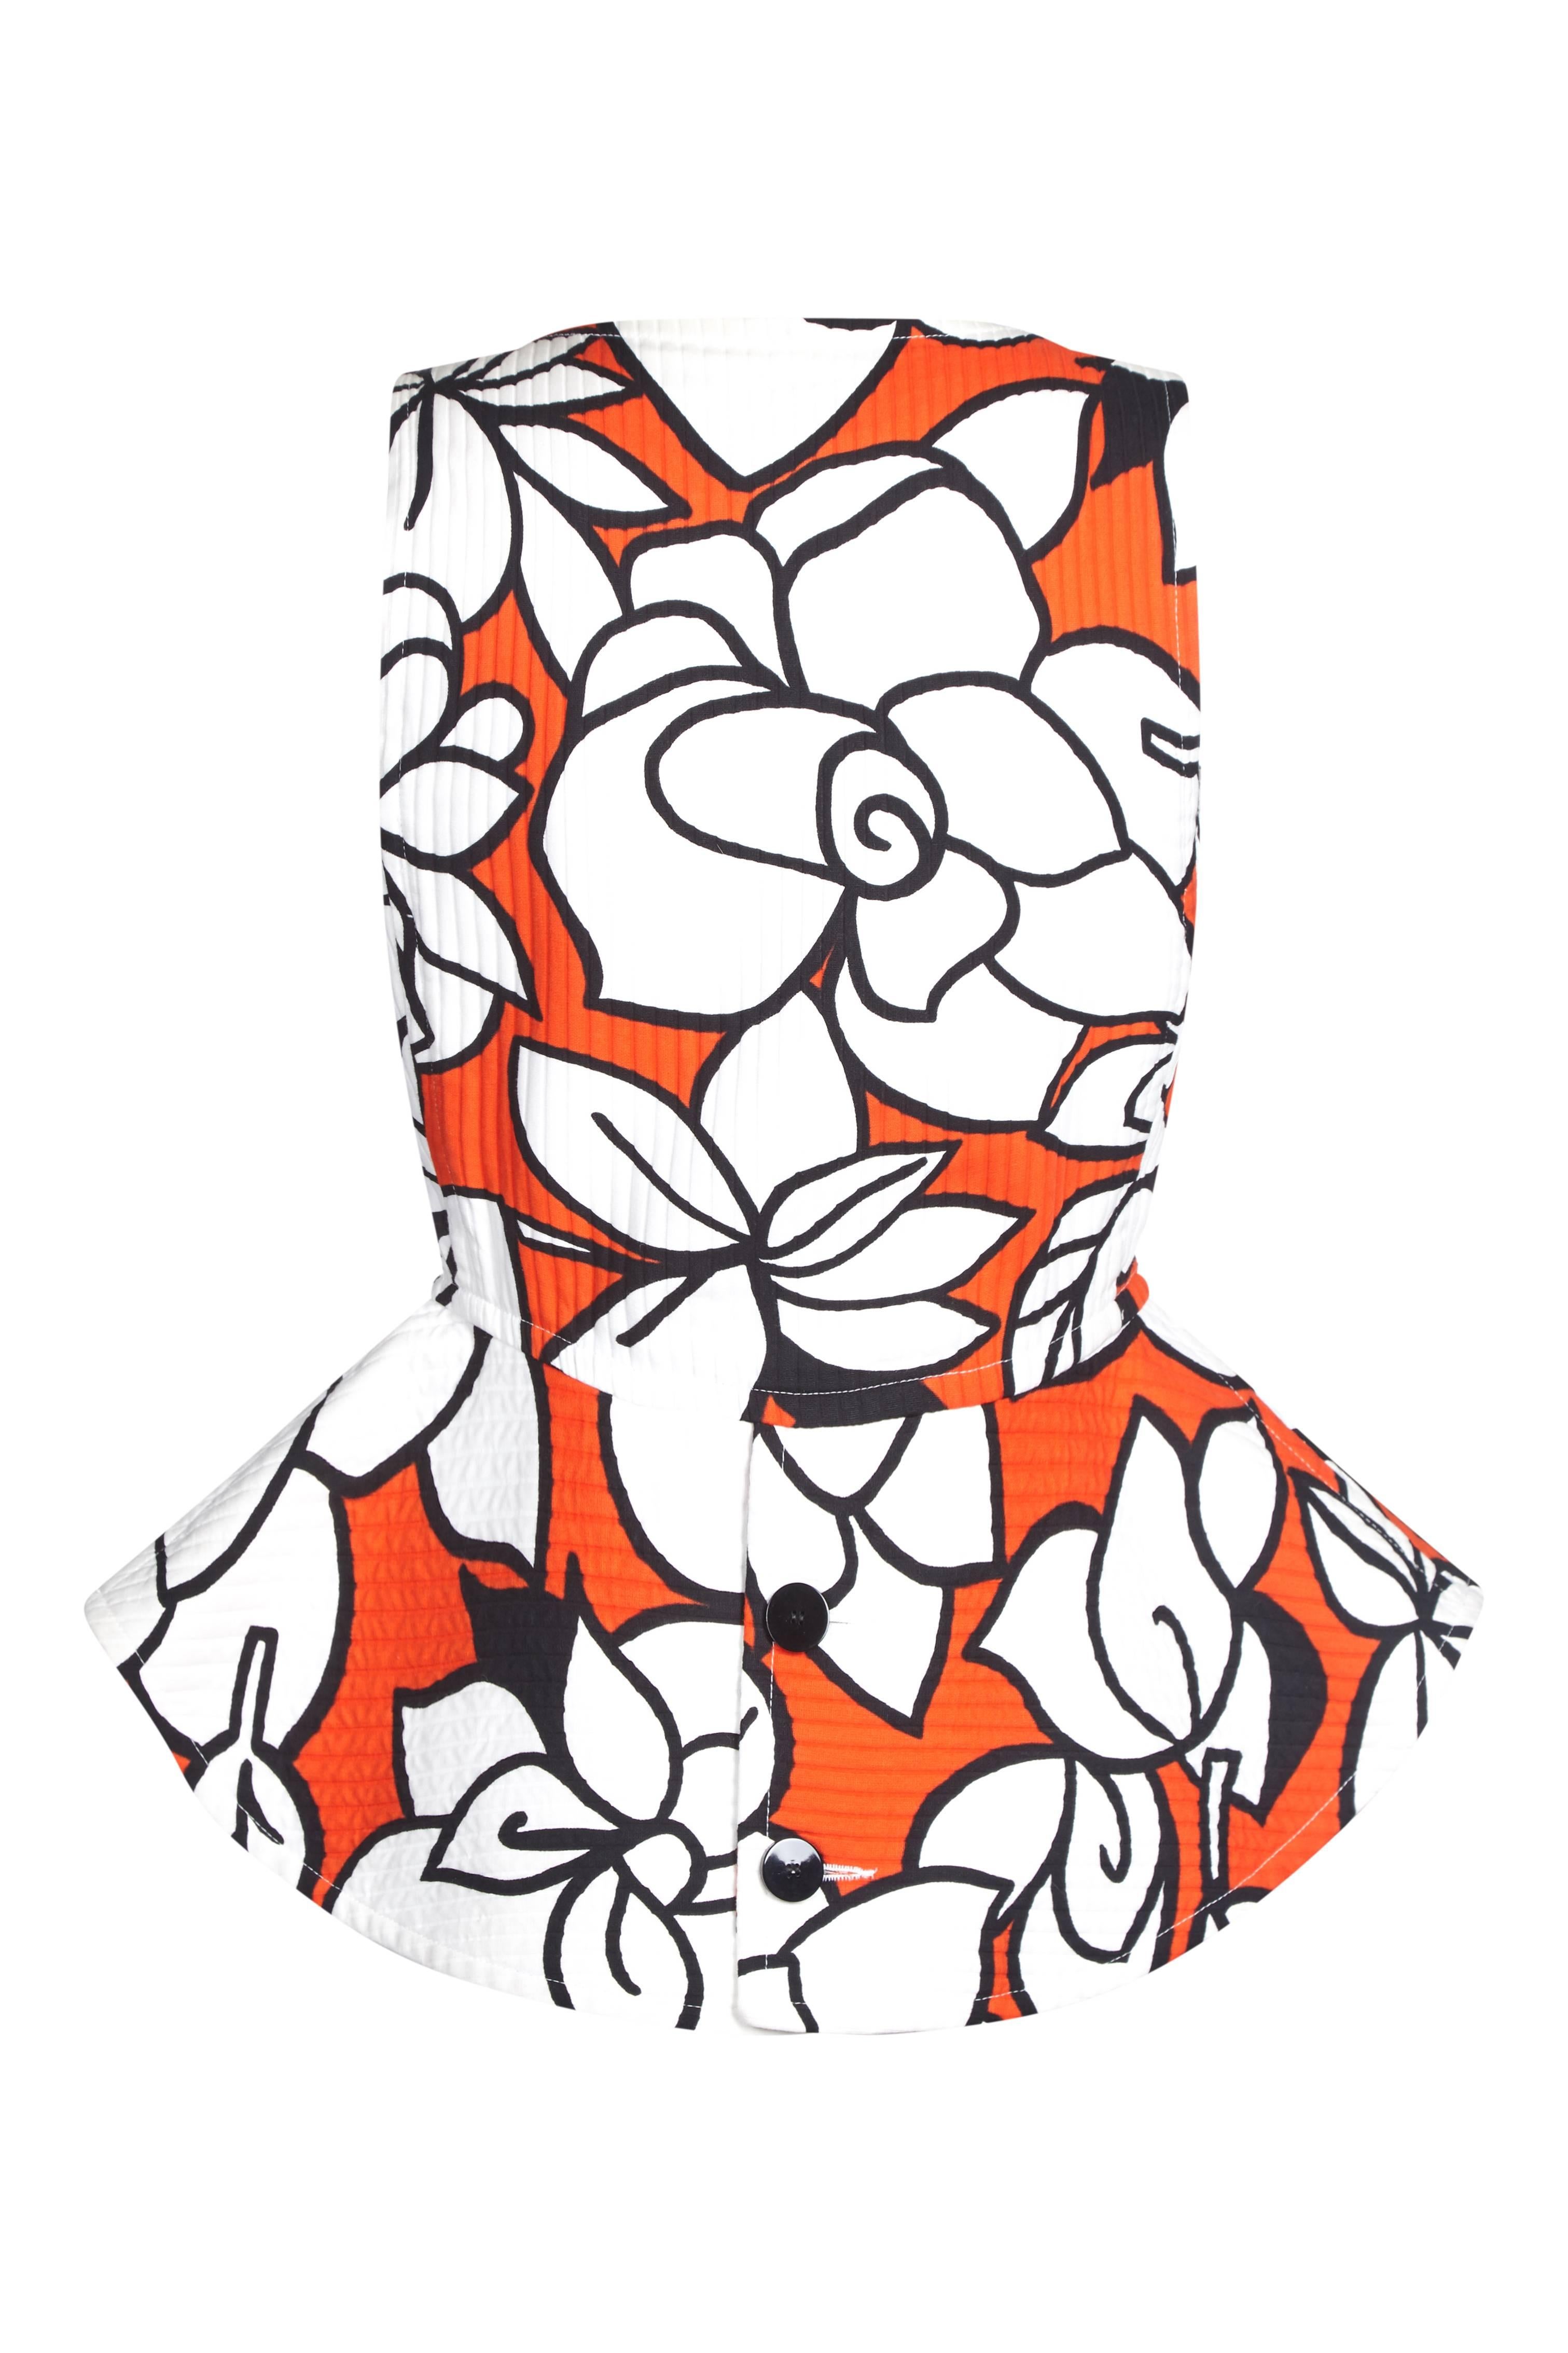 Colourful and graphic 1990s / late 1980s Courreges 'Pop Art' floral print sleeveless peplum blouse. Lovely thick cotton ribbed material with a stiffer peplum in tomato red, white and black. This is an architecturally striking piece, designed to be